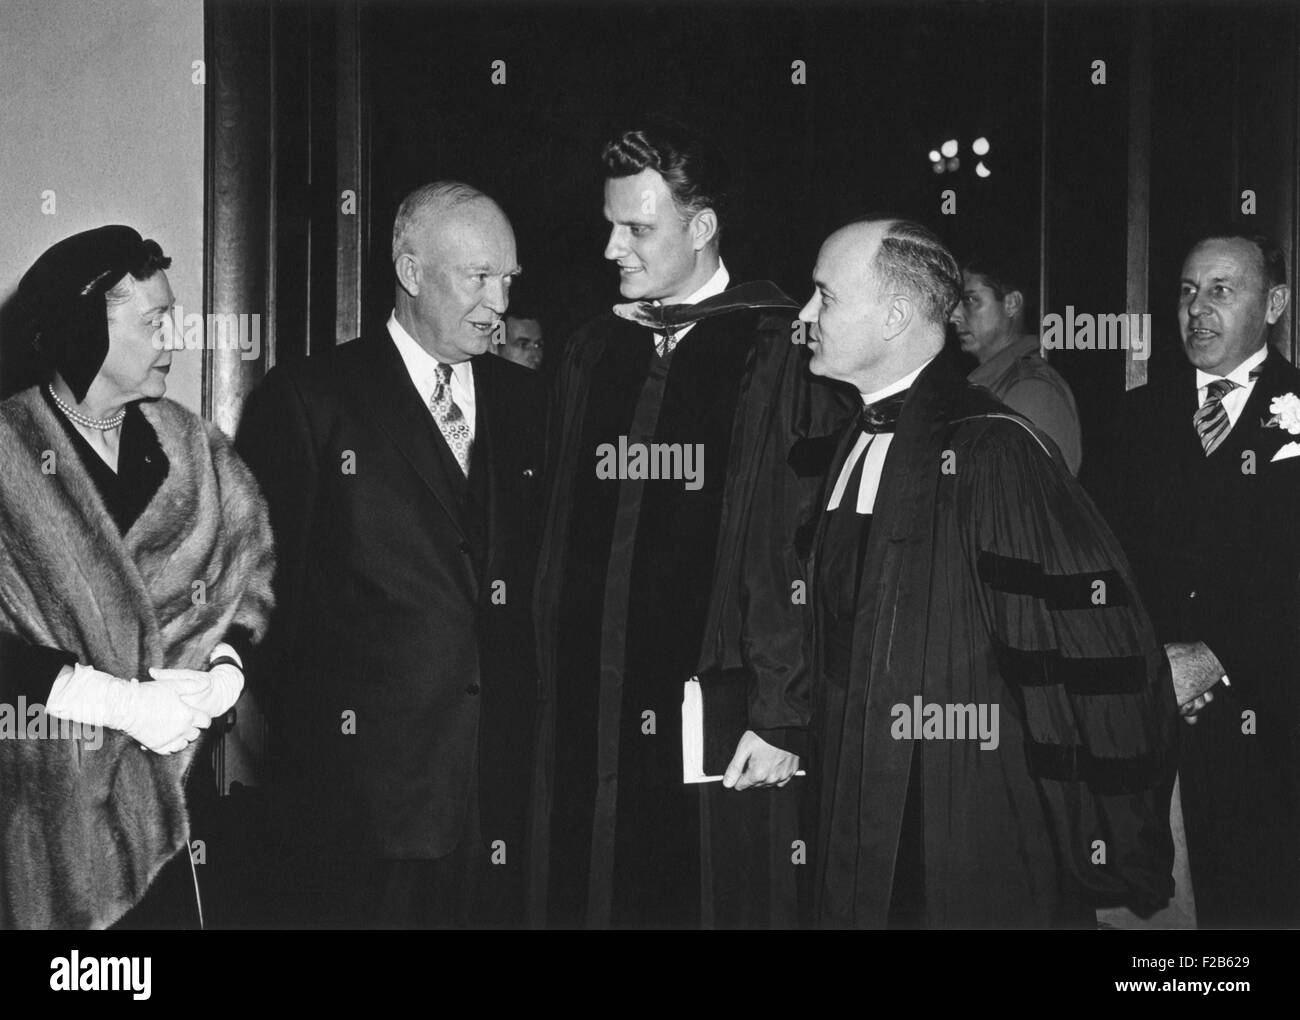 President and Mamie Eisenhower leaving National Presbyterian Church, March 6, 1955. Eisenhower speaks with Evangelist Billy Graham. L-R: First Lady, the President, Rev. Billy Graham, Dr. Edward Elson. - (BSLOC 2014 16 169) Stock Photo